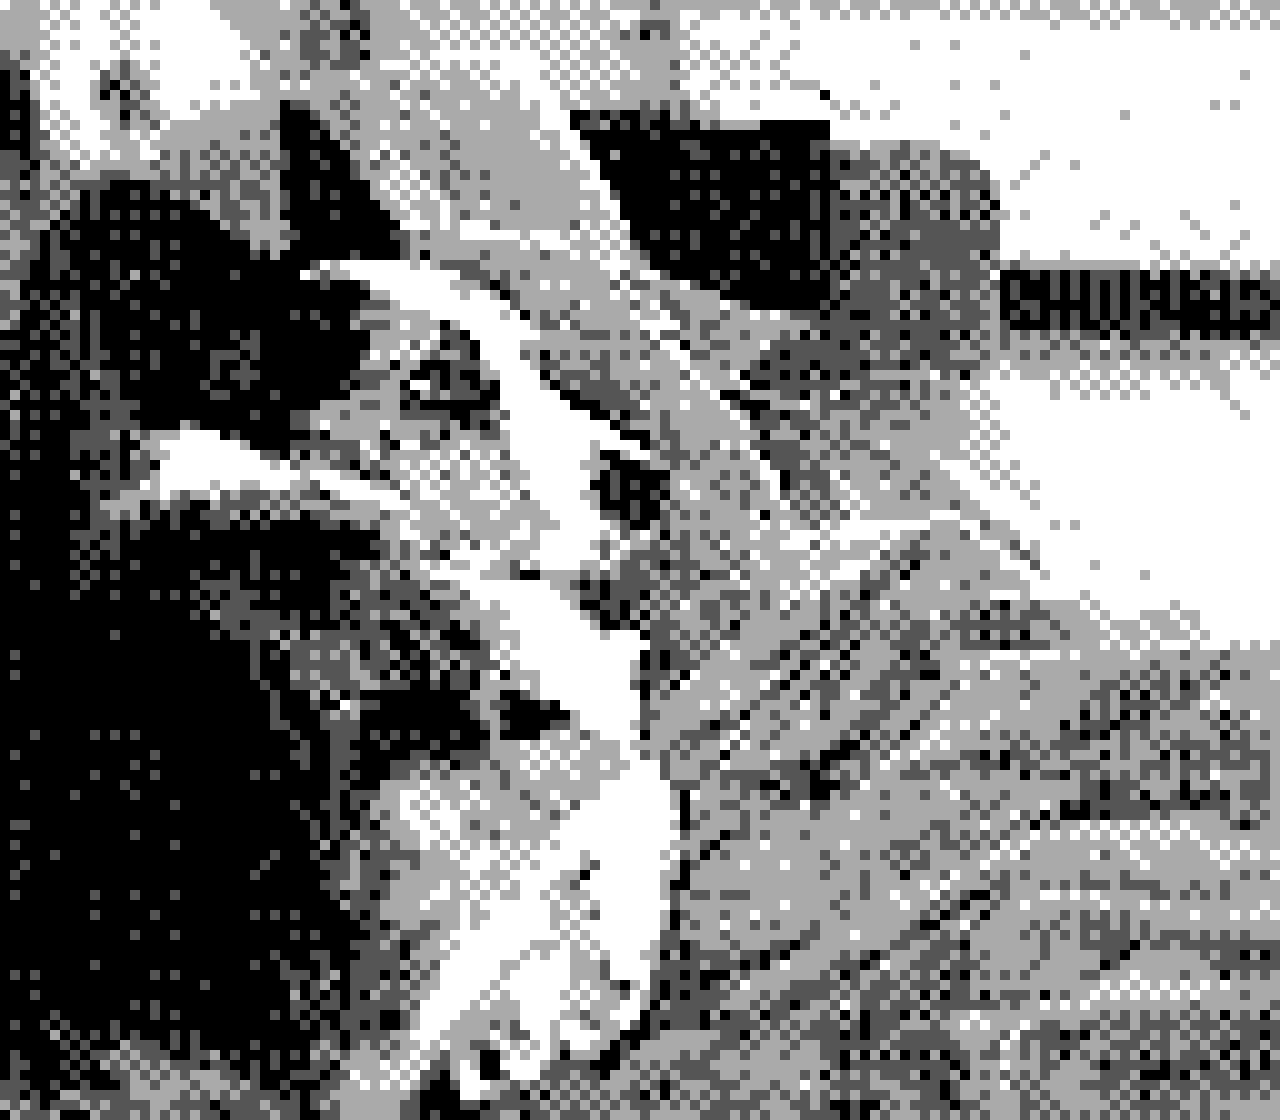 Gameboy Camera quality tests